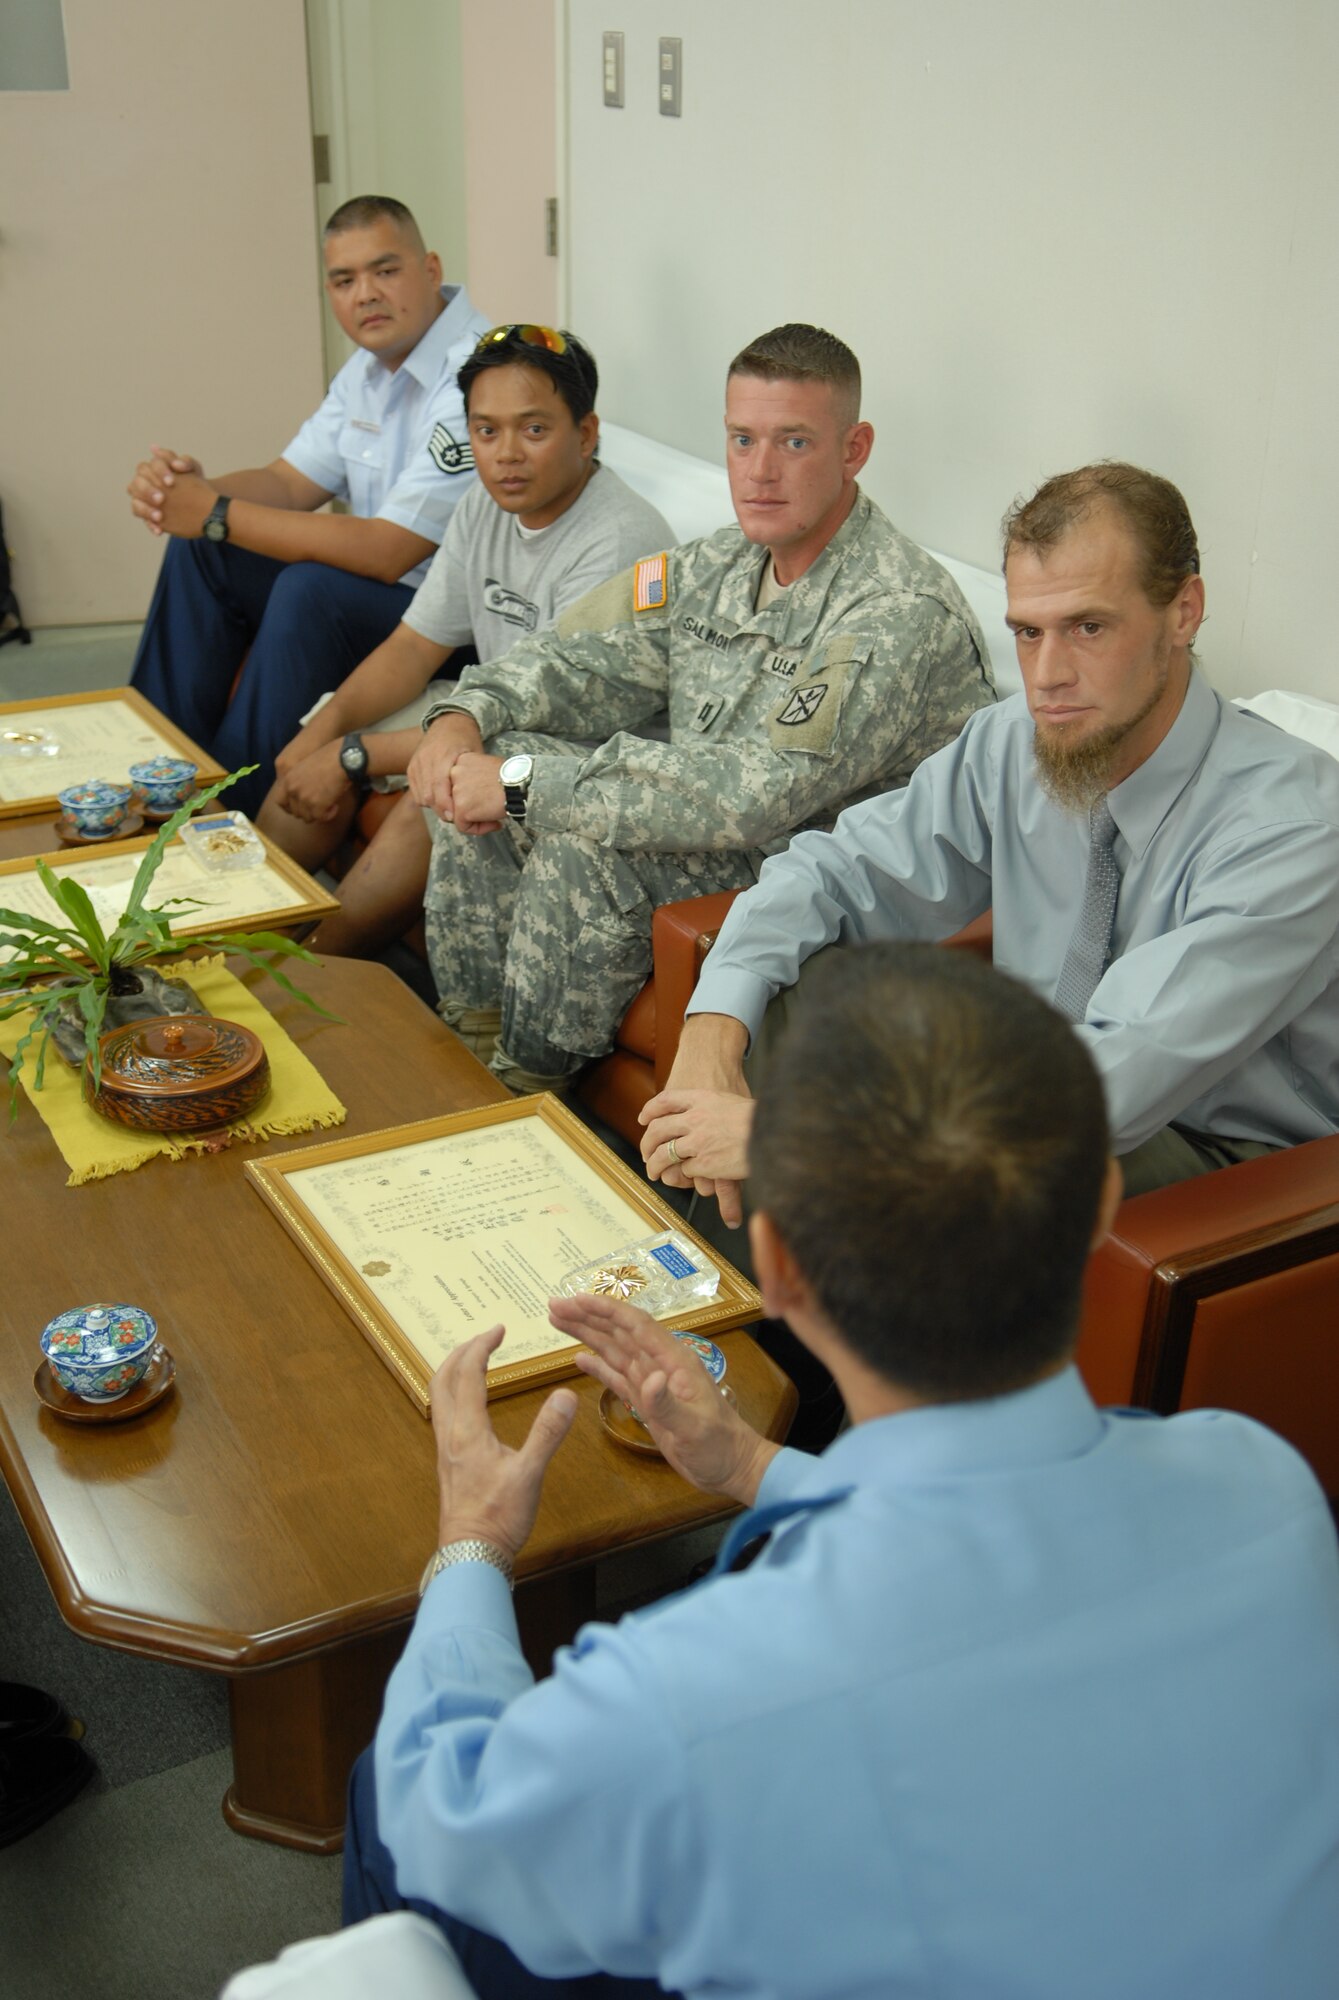 (Left to right) Staff Sgt. John Robinson, 18th Component Maintenance Squadron; Michael Sidniey, a local fisherman; Army Capt. Scott Salmon, 349th Signal Company commander, Torii Station; and Greg Springle, a scuba instructor assigned to Camp Foster, share tea and conversation with Akira Tamanaha, Okinawa Police Station chief and senior superintendent. Chief Tamanaha presented the four men with letters of appreciation for their participation in the recent rescue of an Okinawan teenager and fisherman from drowning. (U.S. Air Force photo/Staff Sgt. Nestor Cruz)